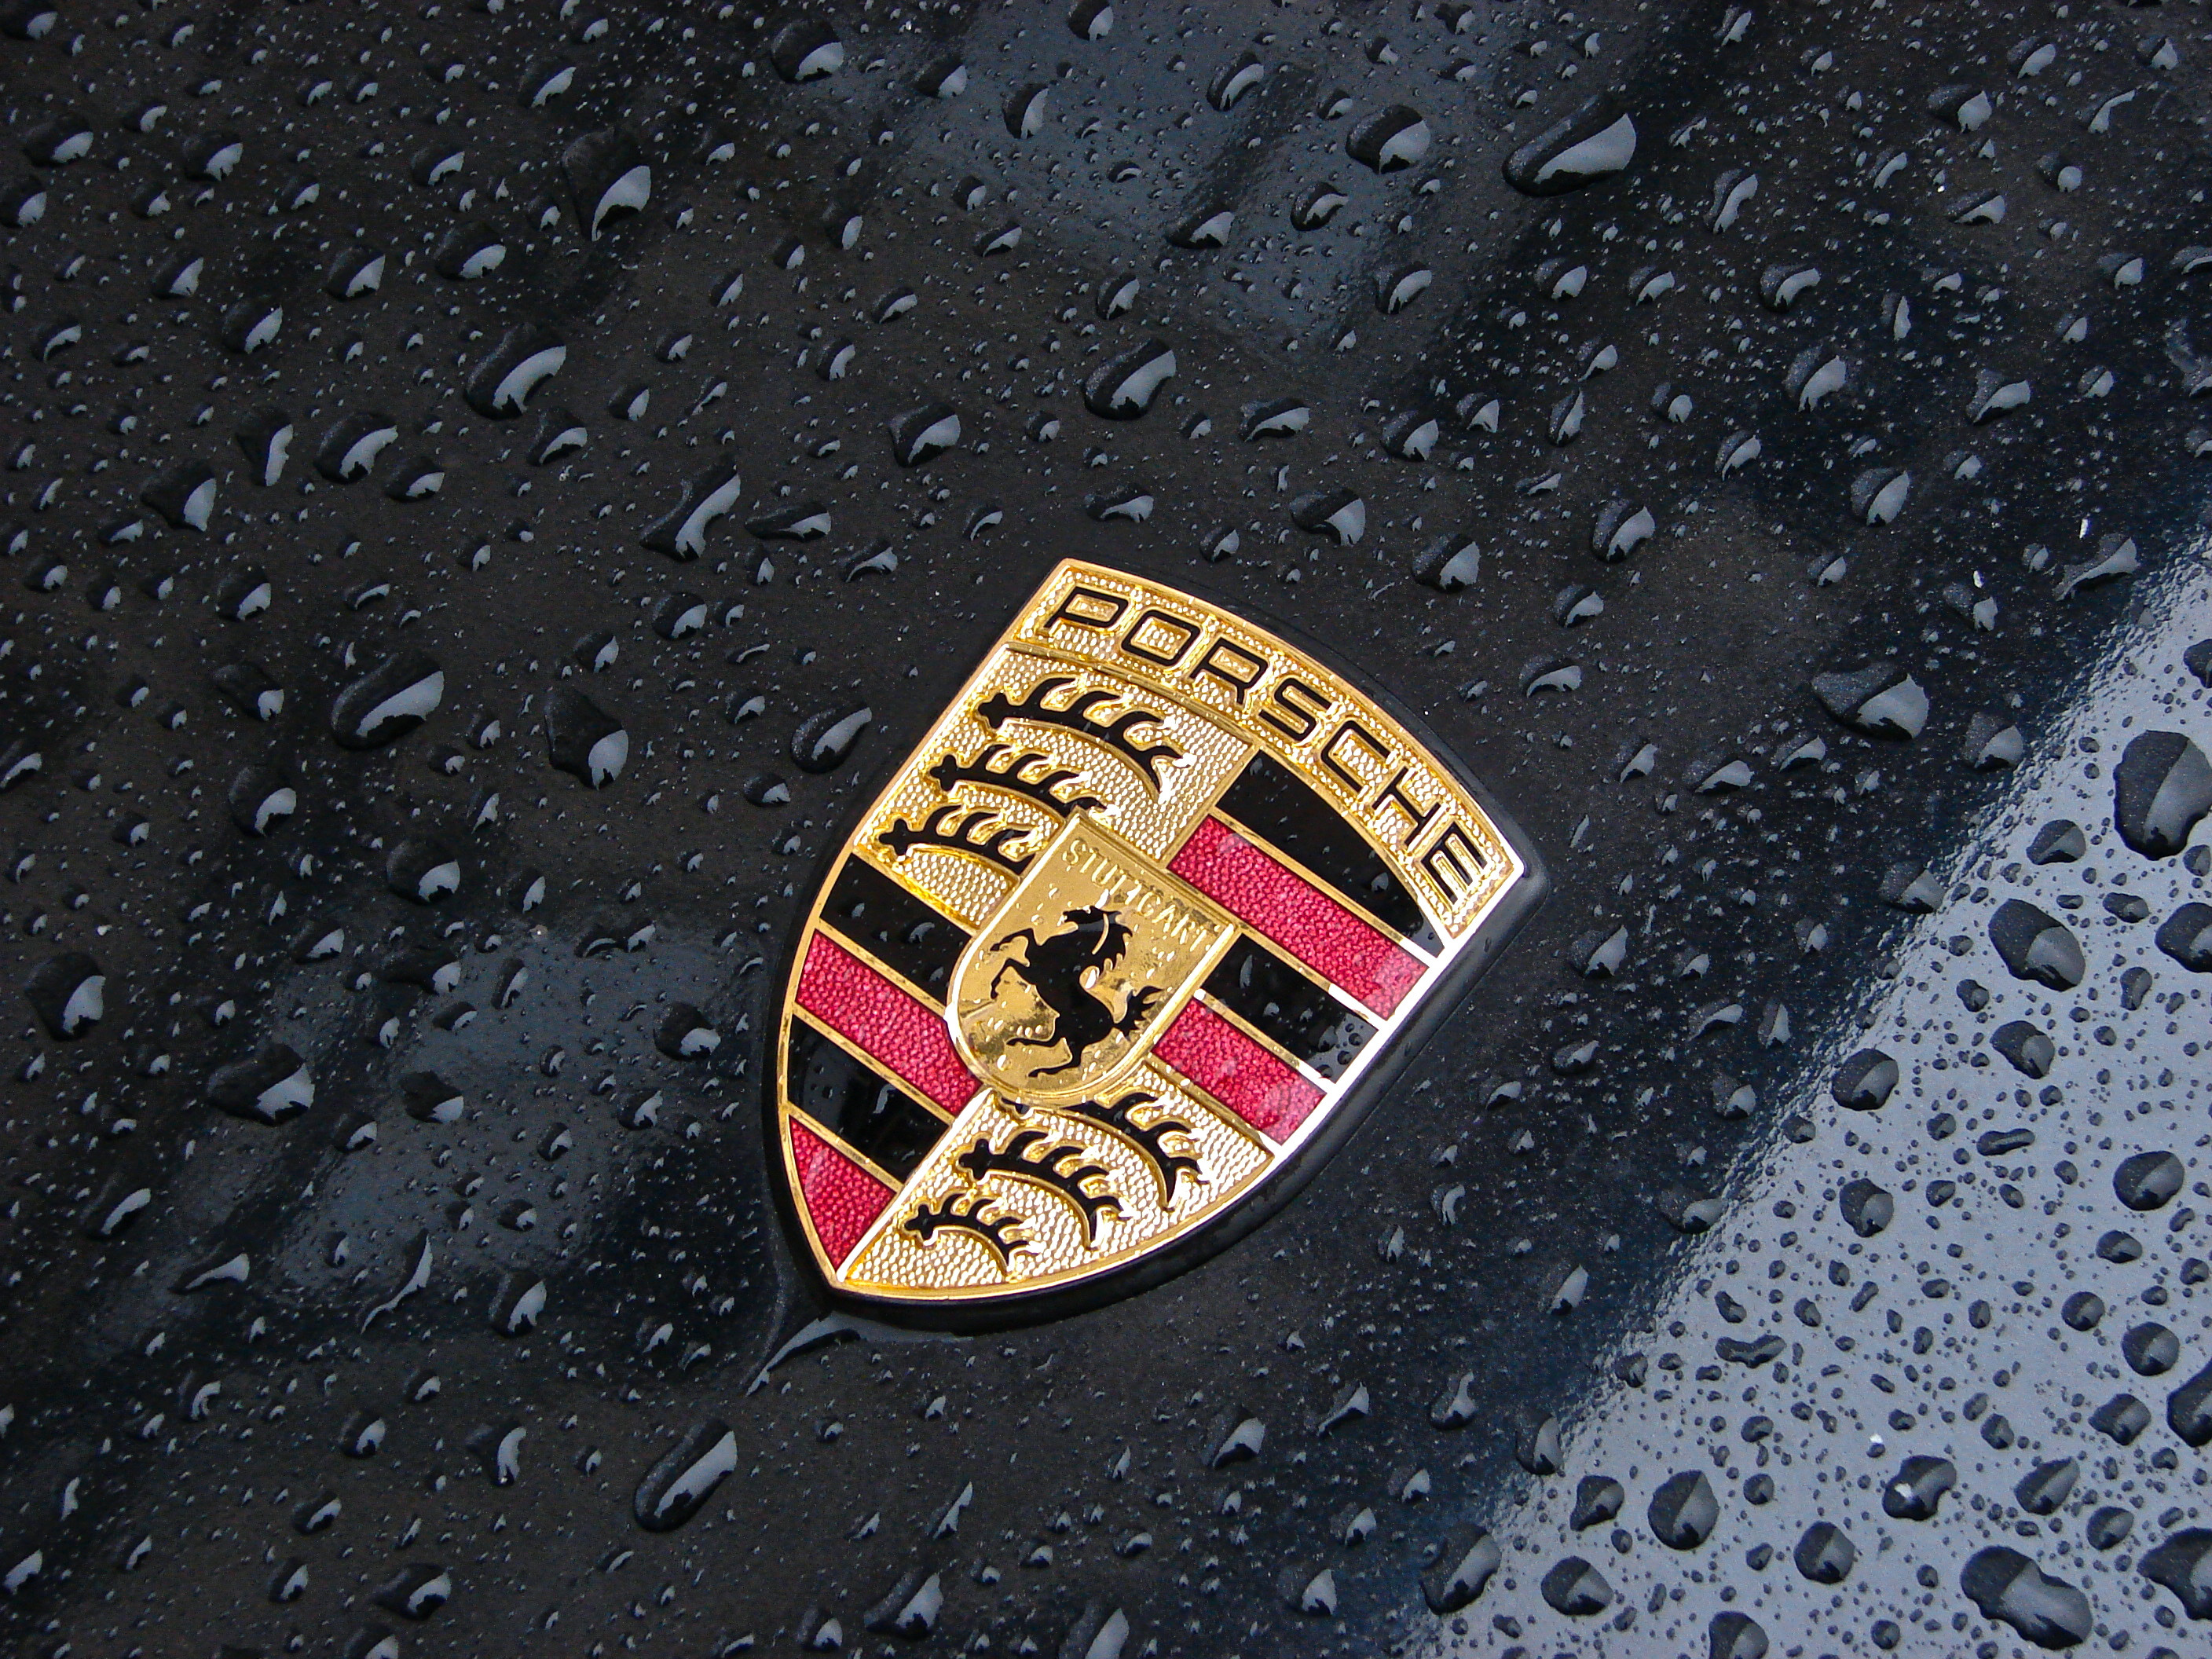 2816x2112 0 1920x1200 Porsche Wallpapers High Resolution Lo  Porsche is  working on a variable compression engi